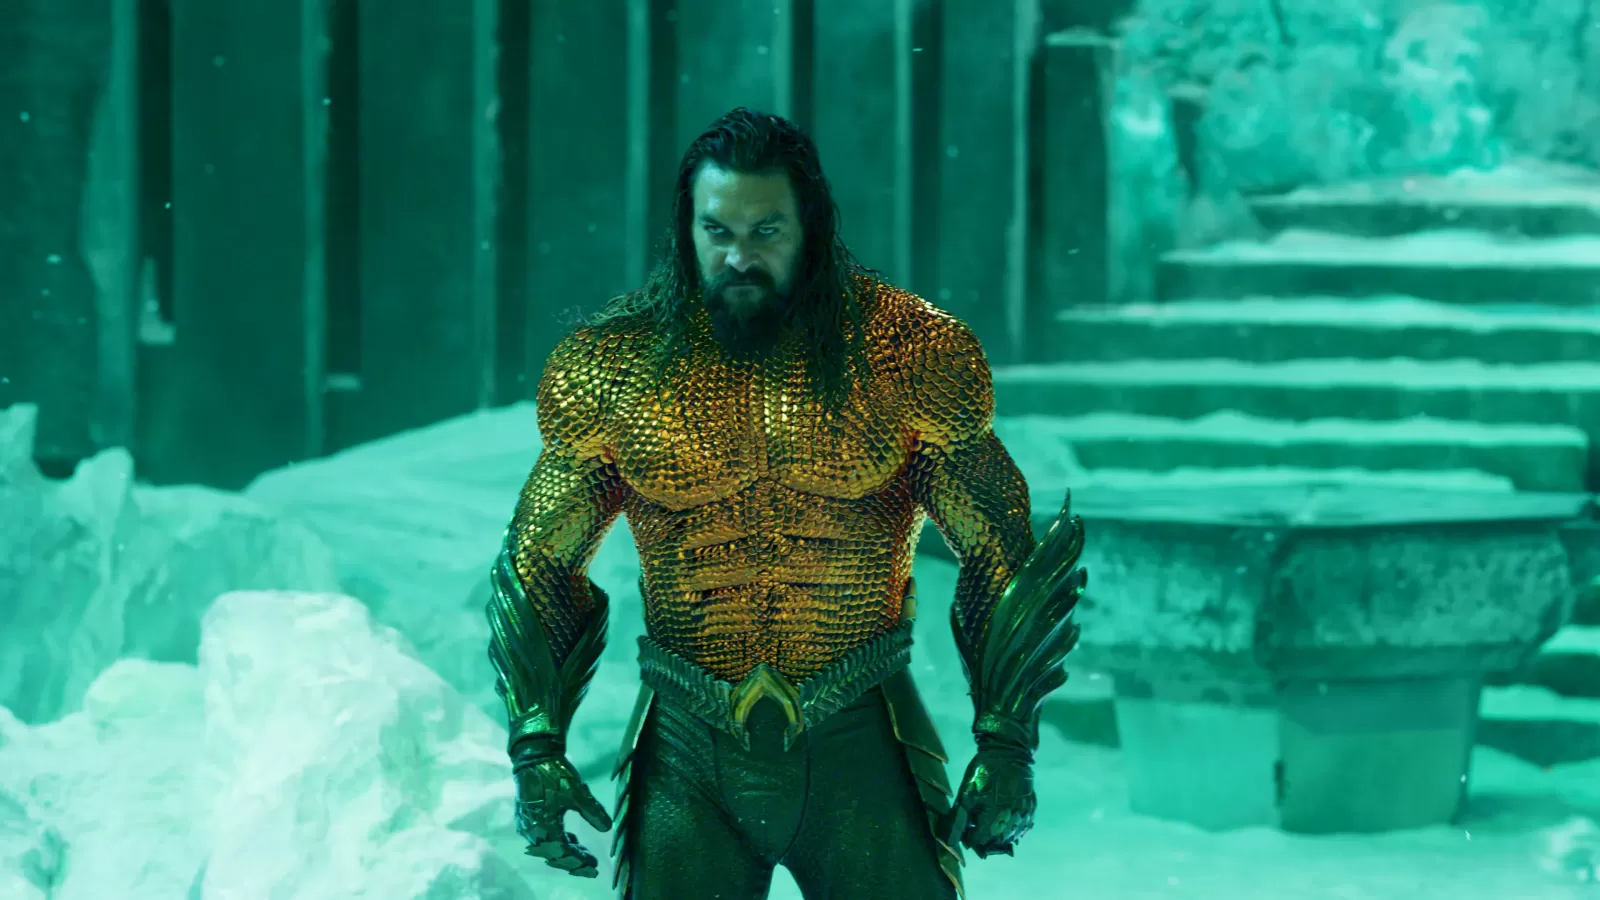 Aquaman and the Lost Kingdom, Aquaman and the Lost Kingdom full movie free online, Watch online Aquaman and the Lost Kingdom full free, Aquaman and the Lost Kingdom online, See movie free online Aquaman and the Lost Kingdom, See movie Aquaman and the Lost Kingdom online free full, Aquaman and the Lost Kingdom download, Download movie Aquaman and the Lost Kingdom, See film Aquaman and the Lost Kingdom online, Aquaman Collection, Ancient evil, Brother brother relationship, DC extended universe dceu, Action Movies, Action and Adventure Movies